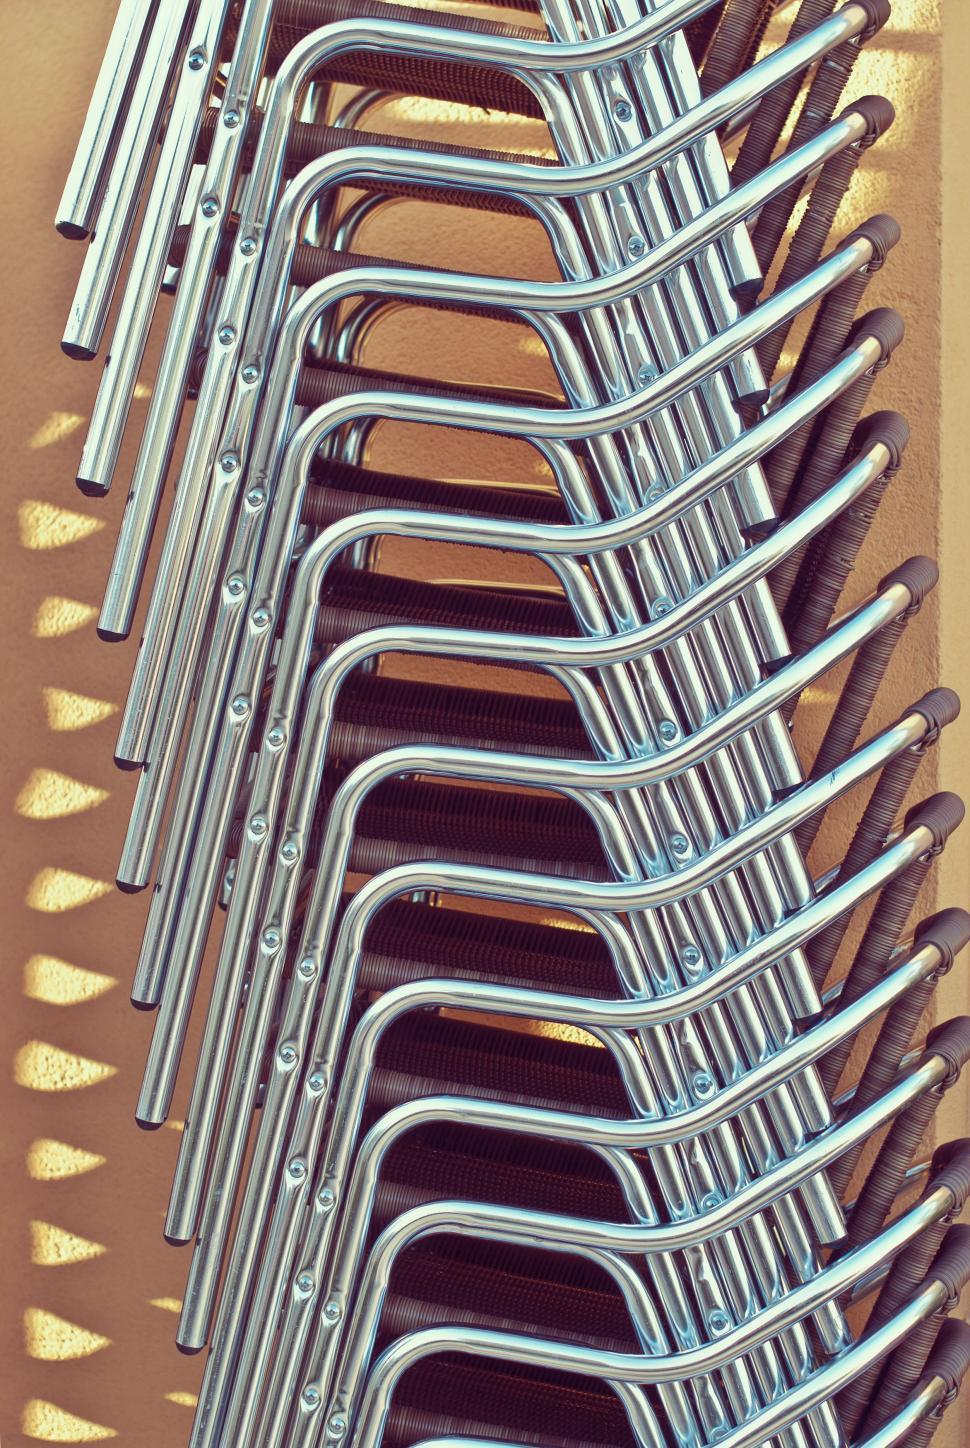 Free Image of Stack of Metal Chairs 